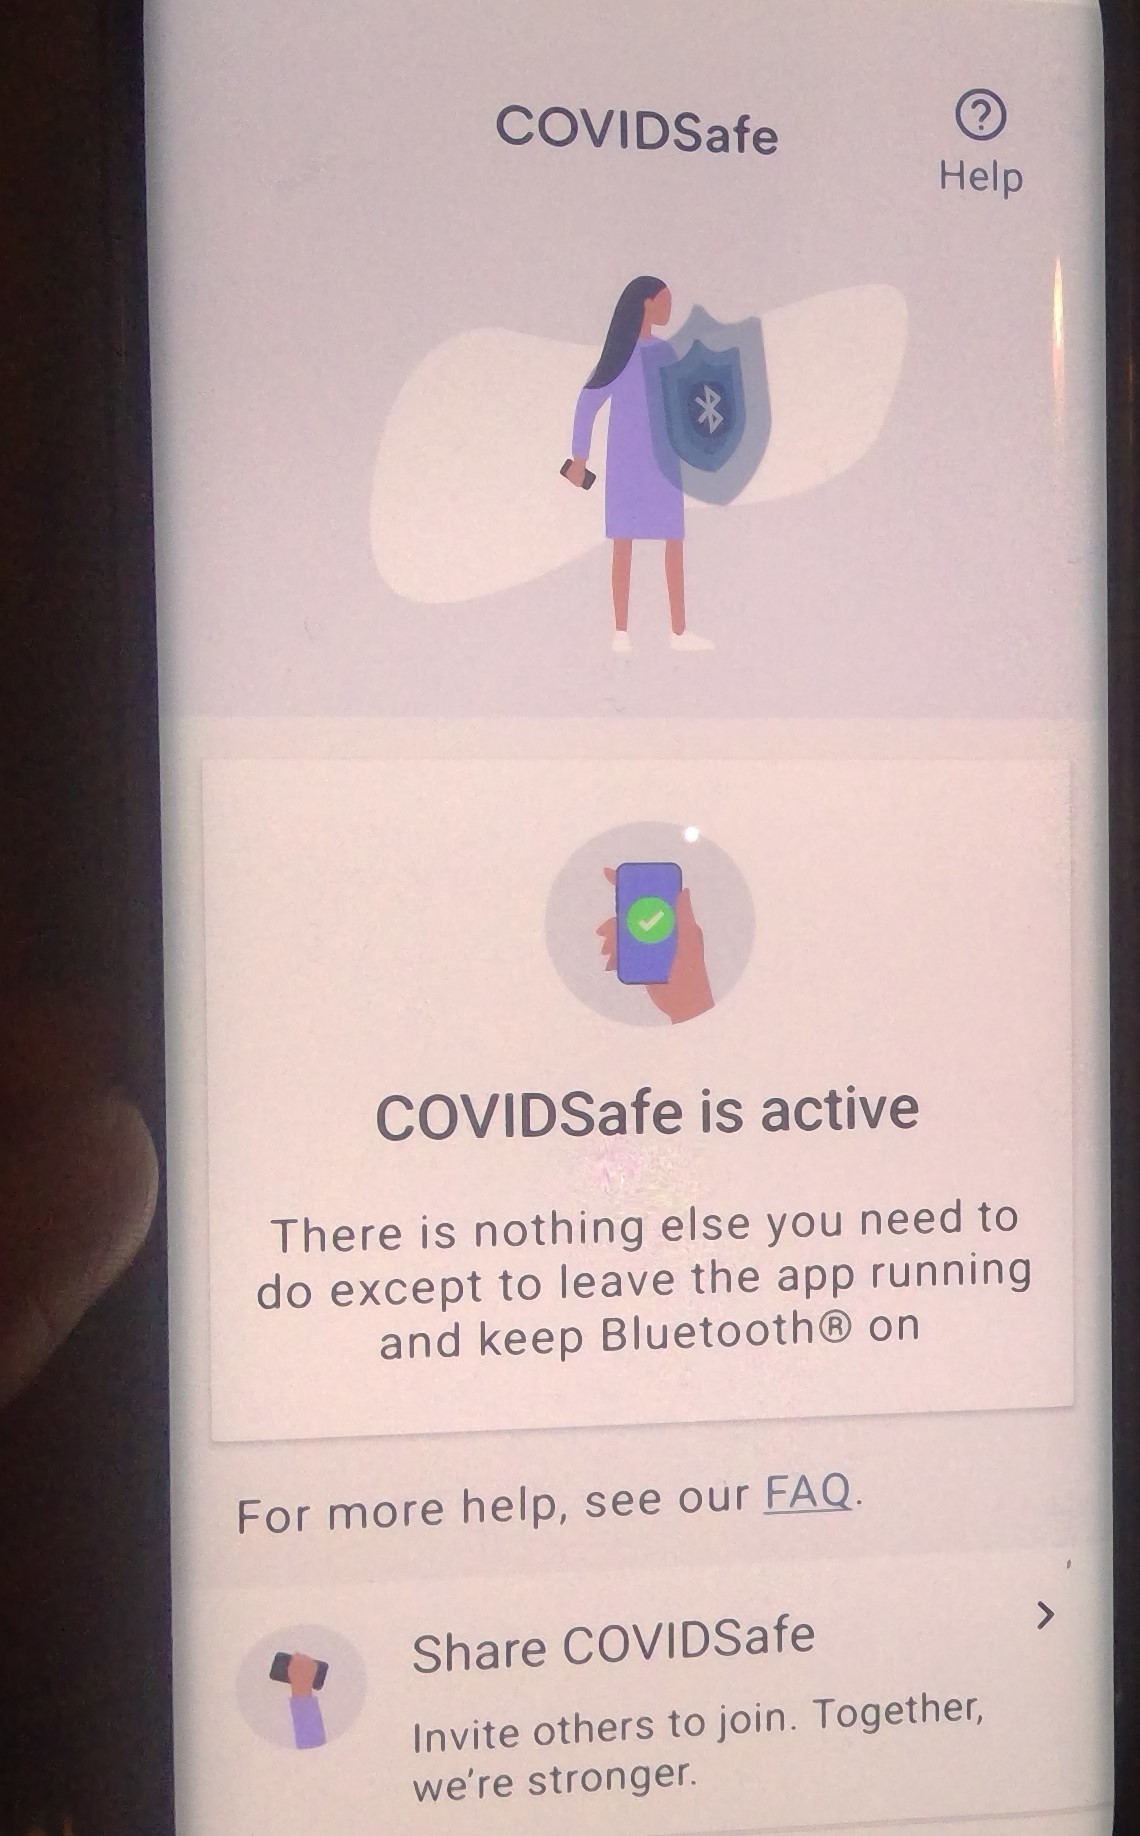 It is important that we all use the COVID Safe App